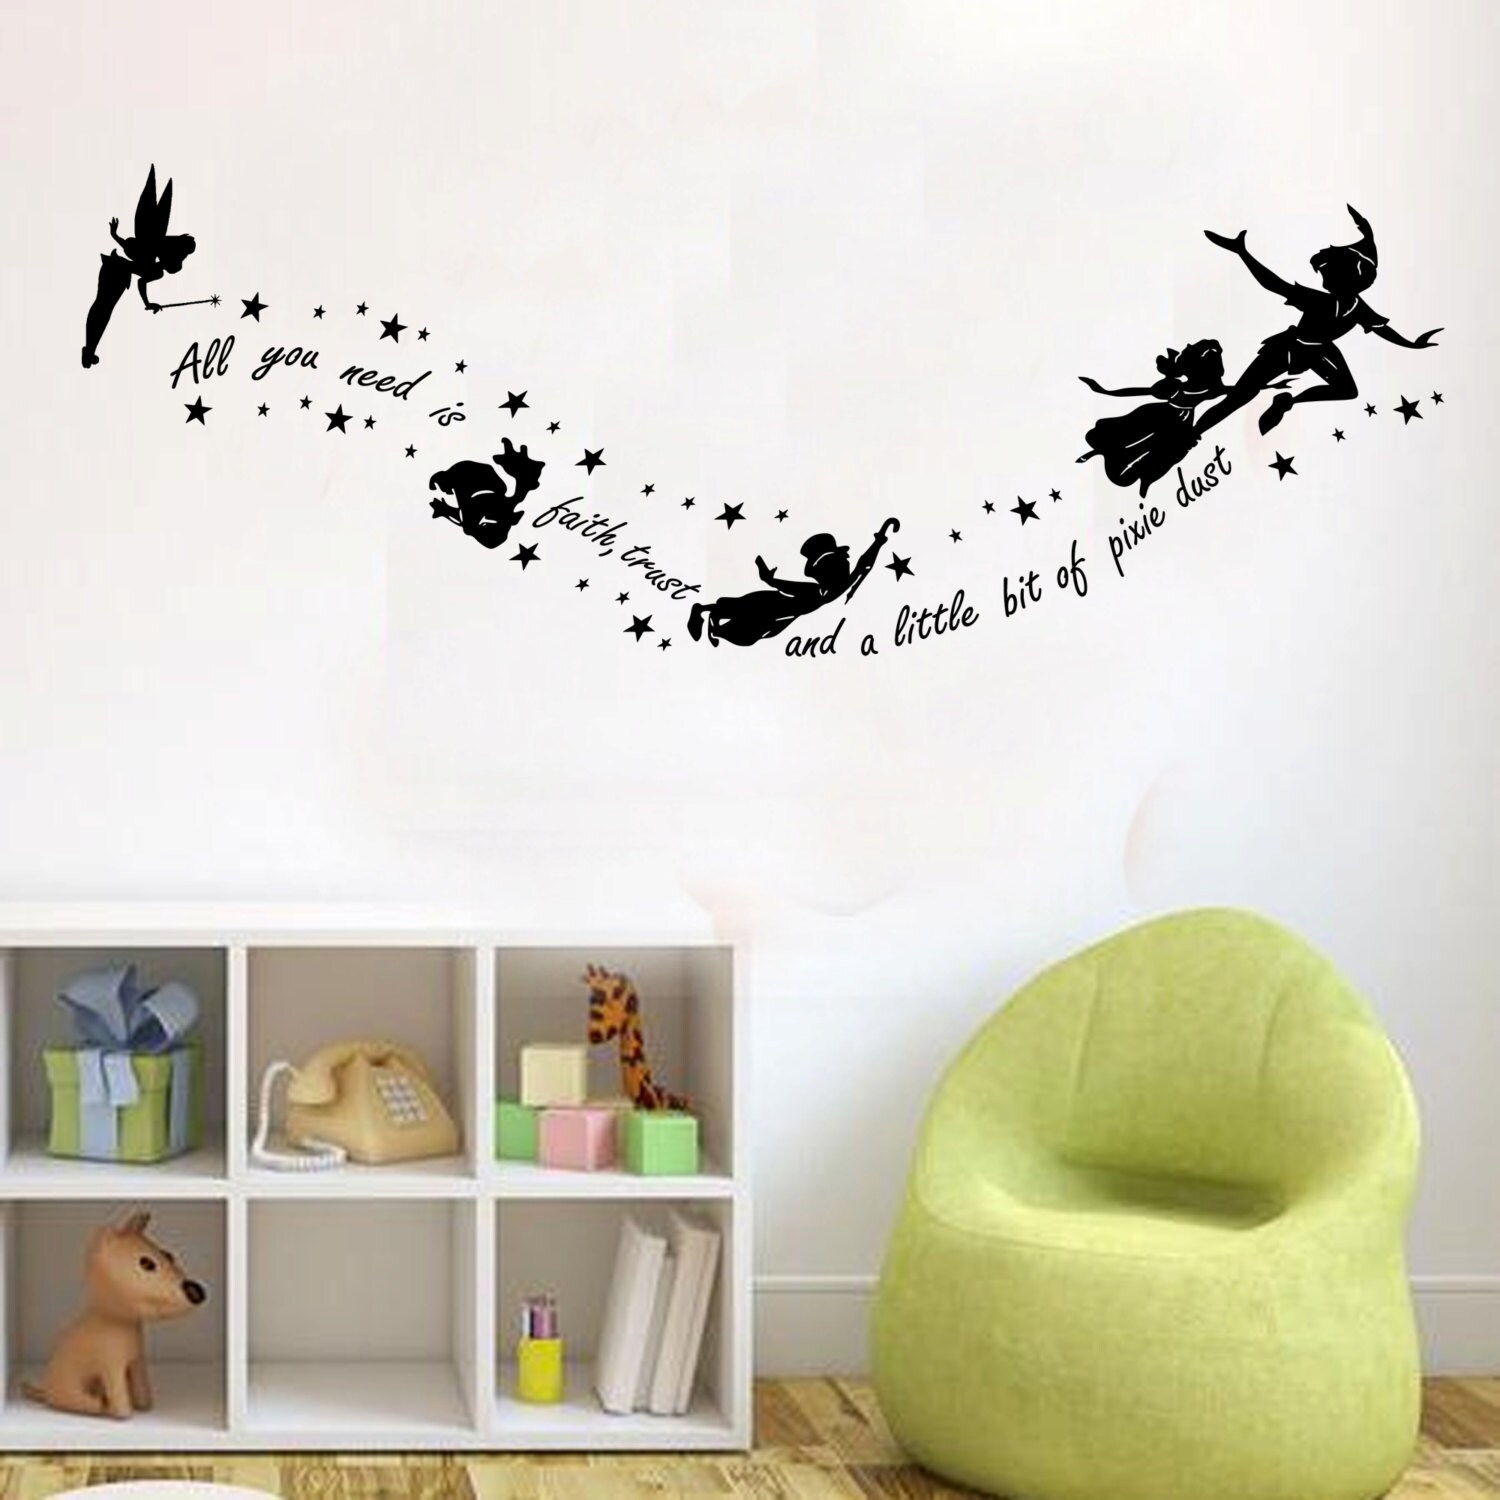 Peter Pan All you need is faith Kids Wall Decal Sticker Vinyl